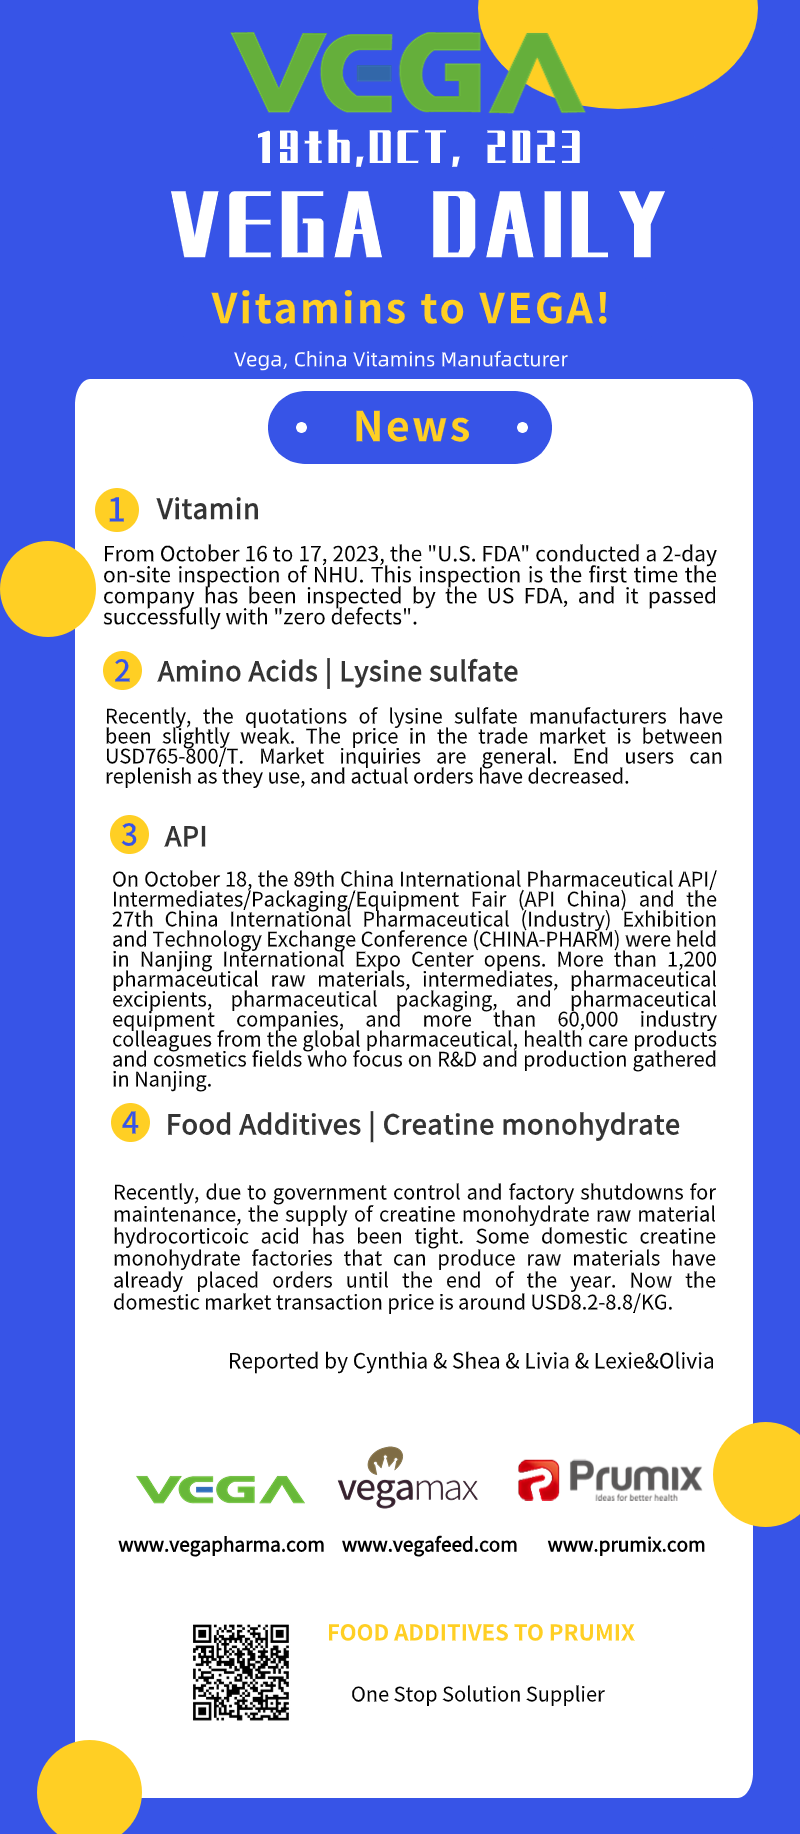 Vega Daily Dated on Oct 19th 2023 Vitamin Lysine sulfate API Food Additives.png